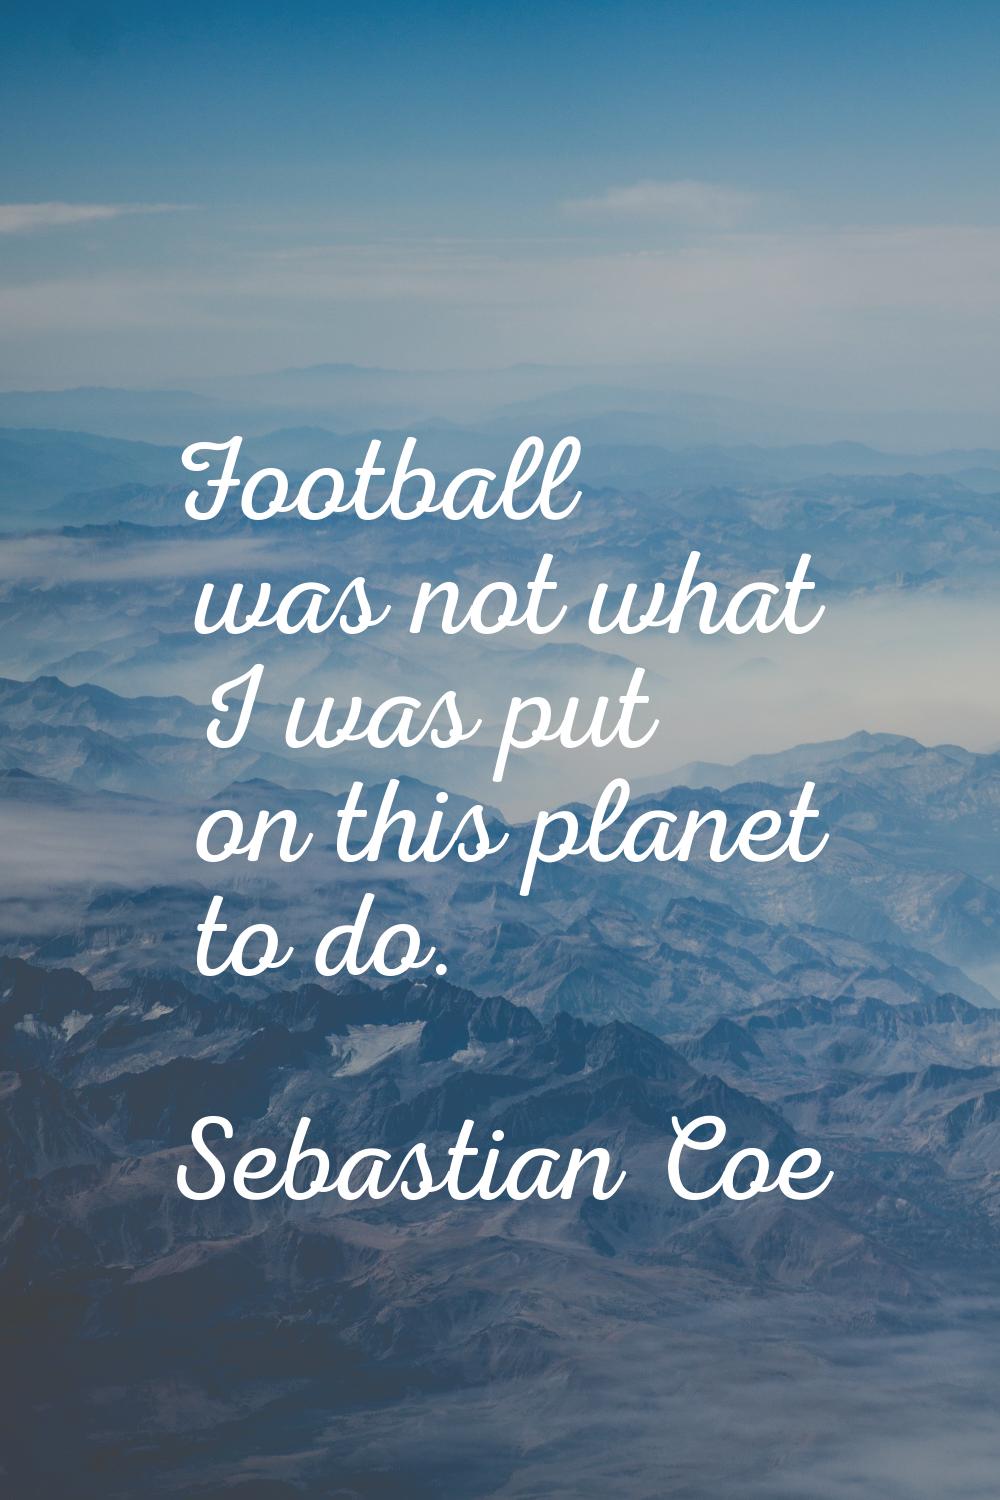 Football was not what I was put on this planet to do.